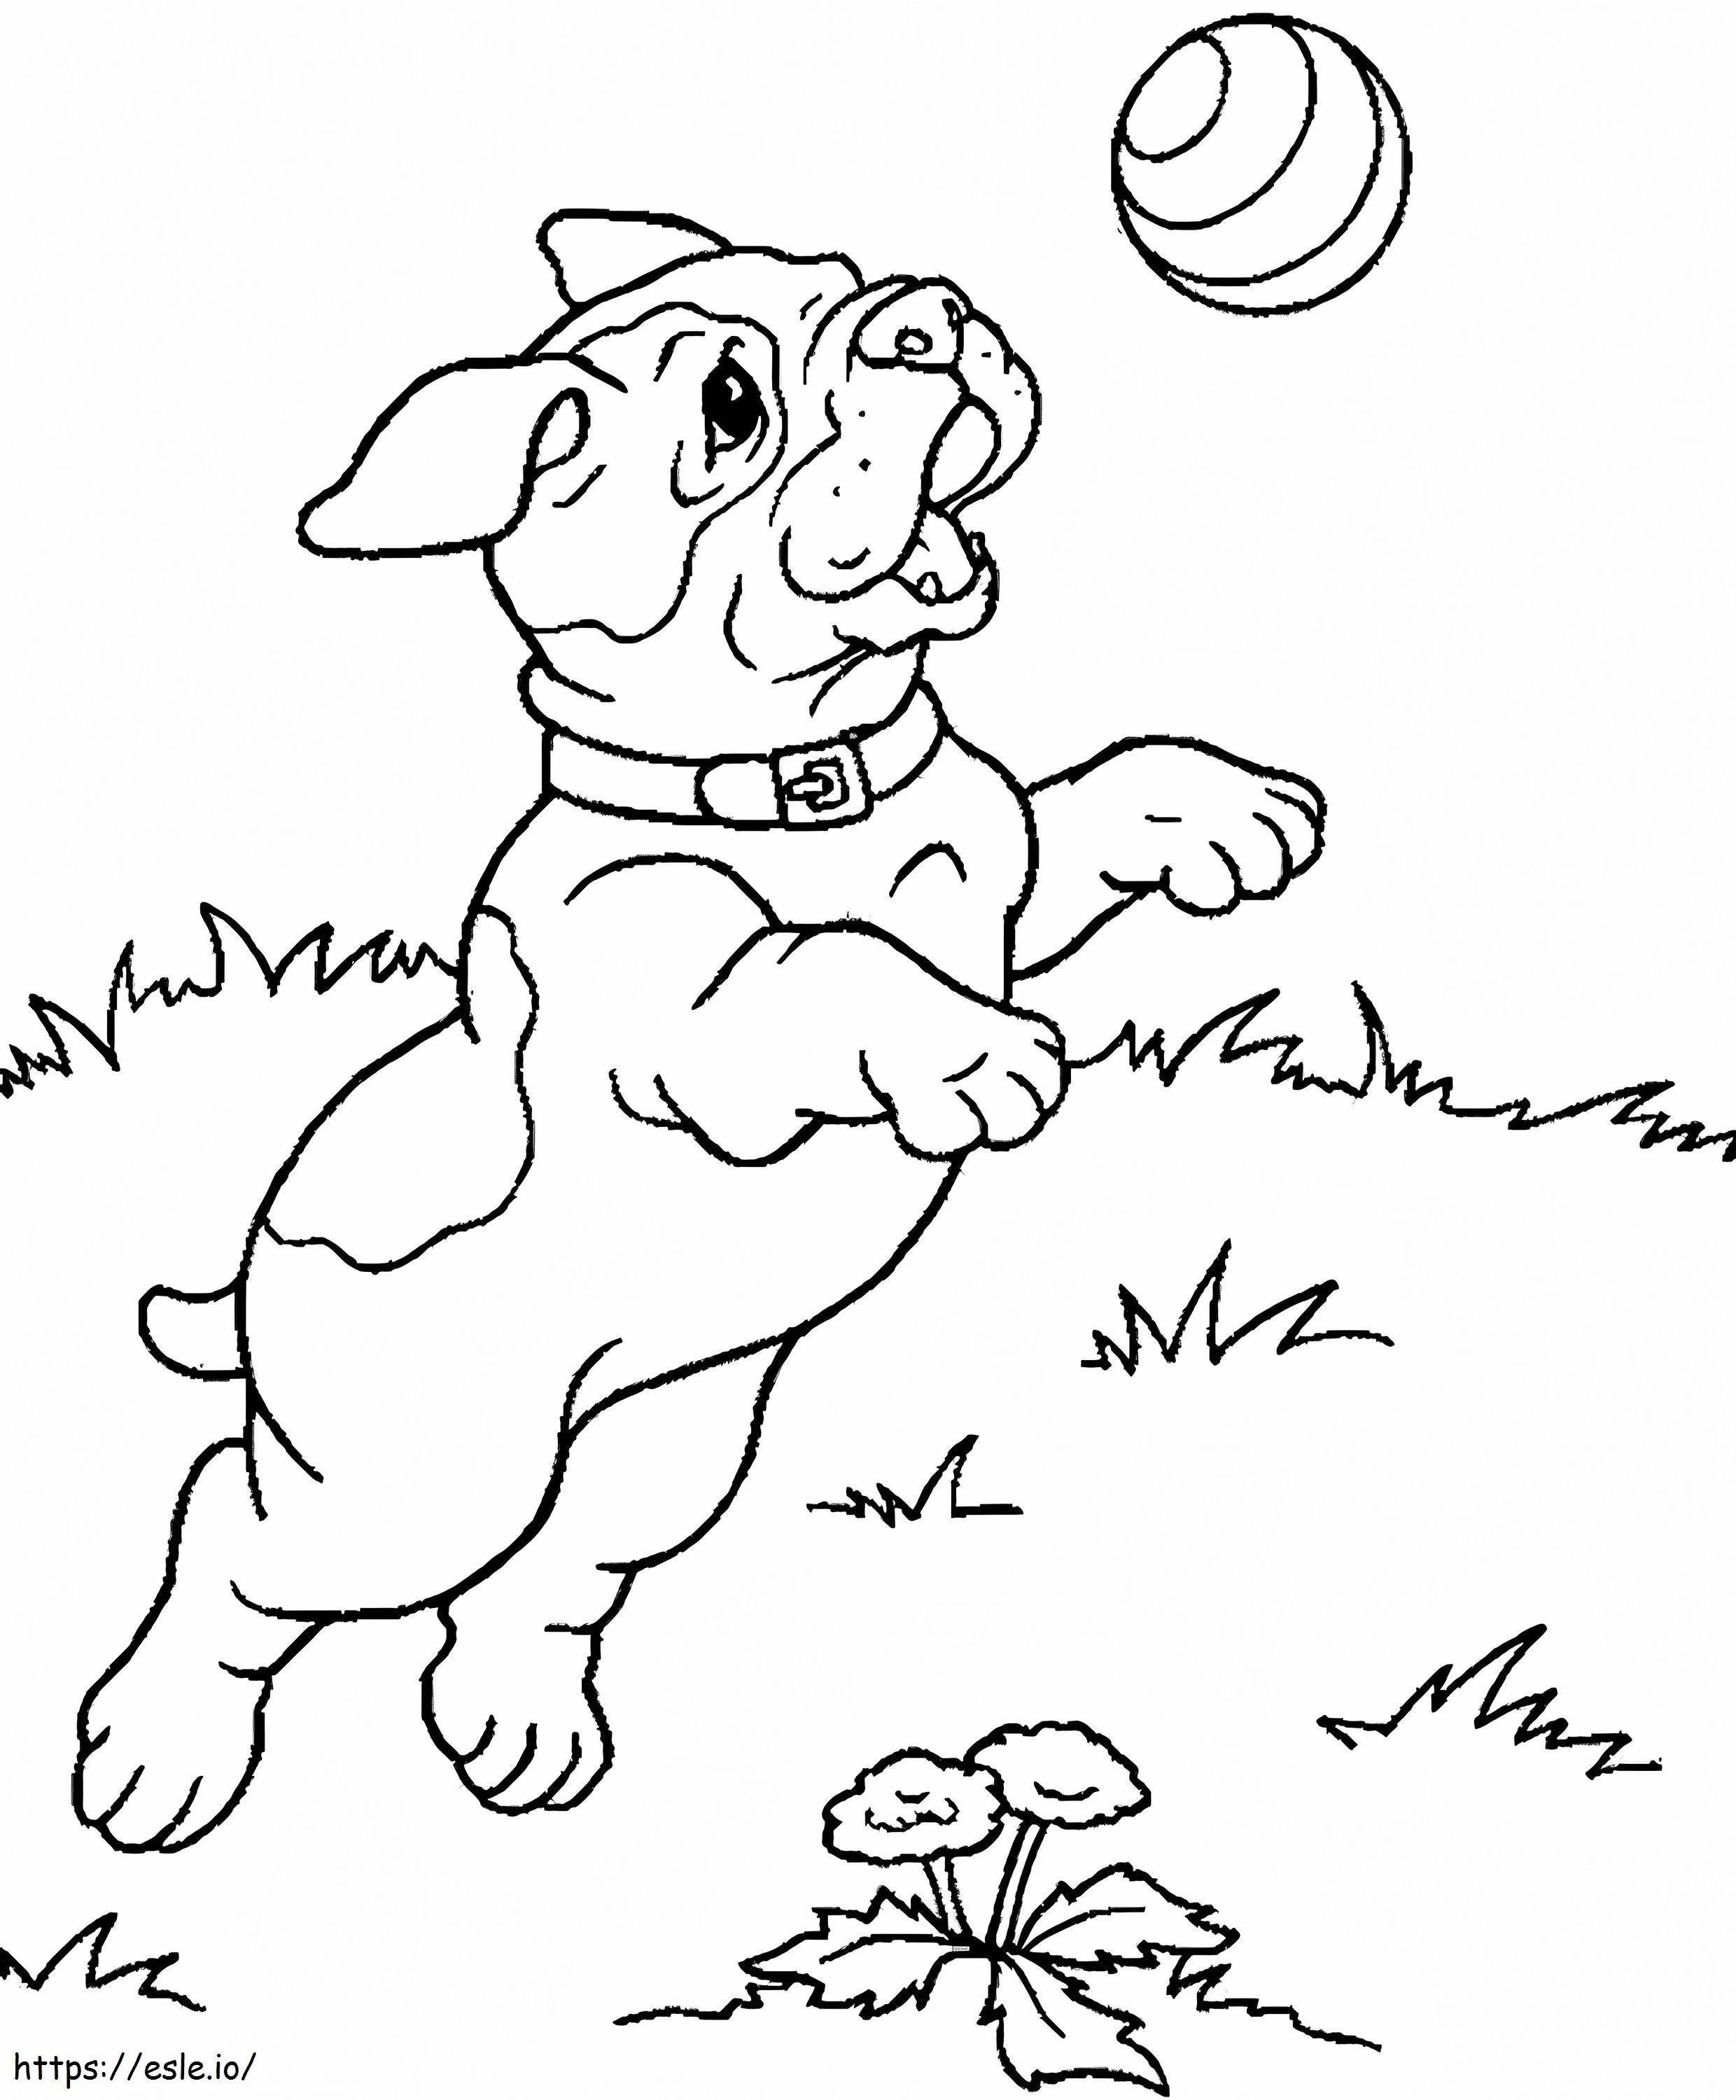 Chc3Ba Chc3B3 Pug Chc6A1I Ve1Bb9Bi Que1Baa3 Bc3B3Ng coloring page